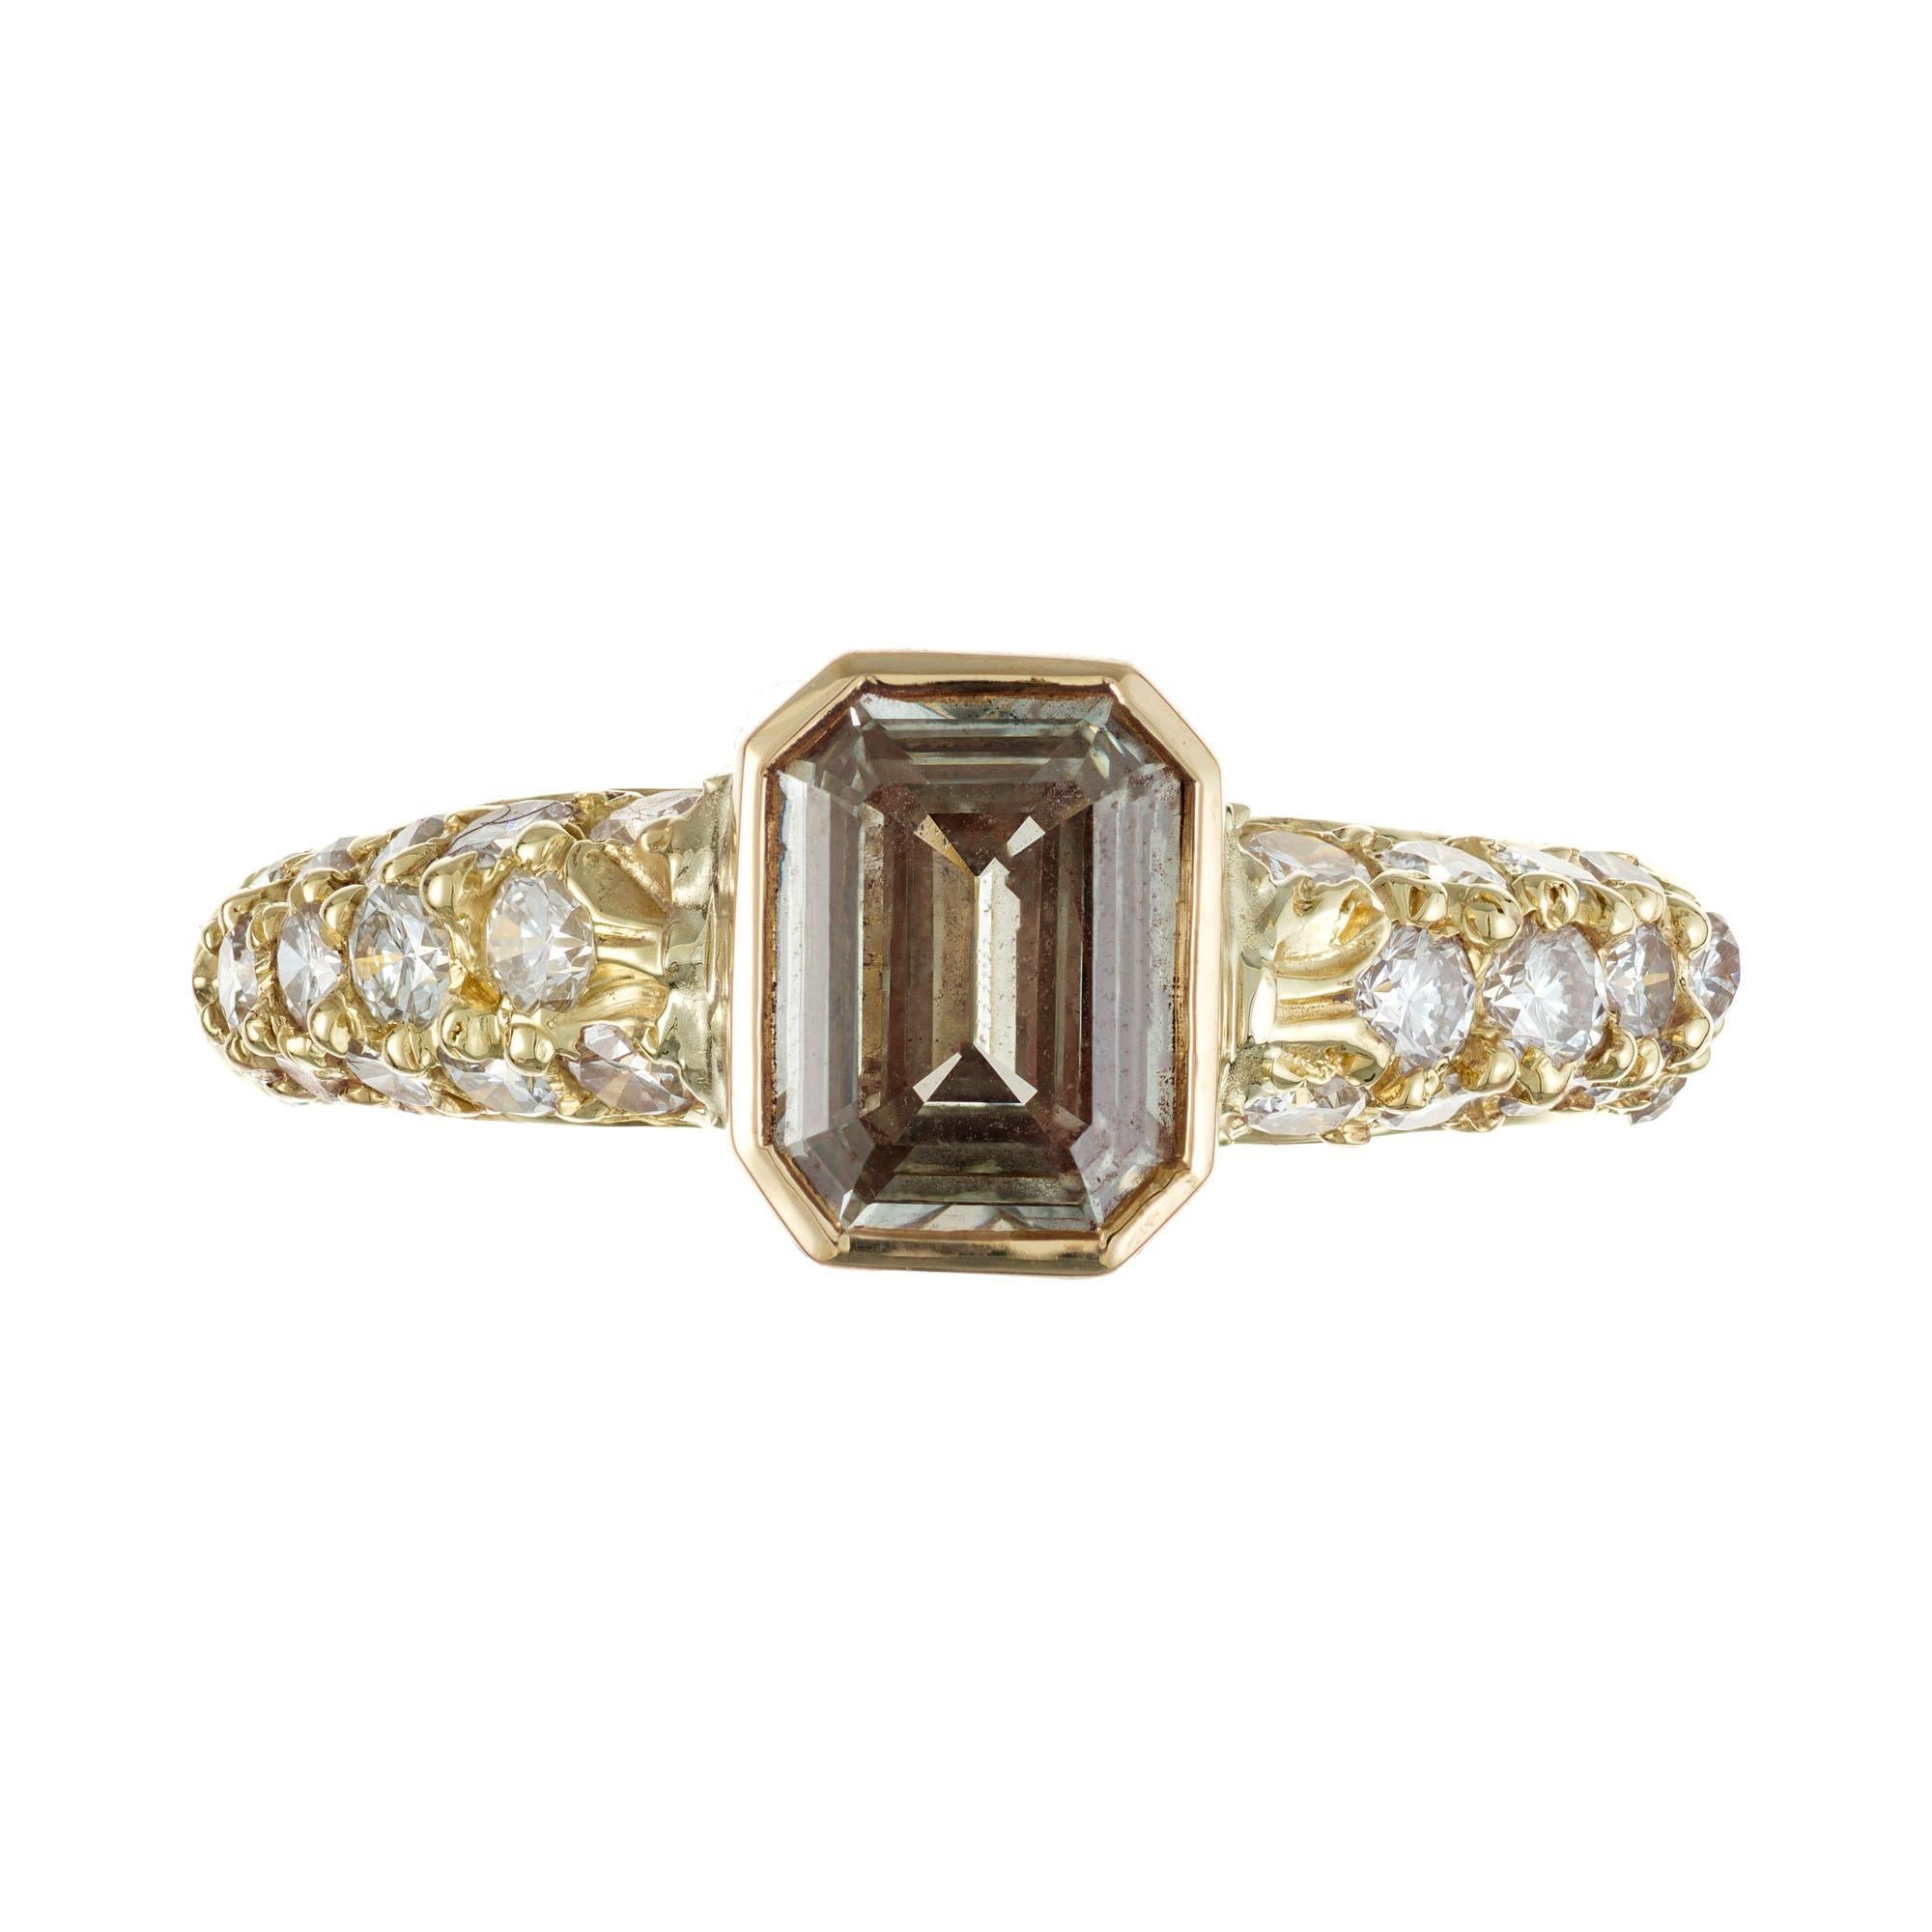 Vintage 1950's light brown diamond engagement ring. GIA certified eight sided emerald cut light brown diamond in a 18k yellow gold custom made bezel setting with 28 full cut round accent diamonds. 

1 emerald cut diamond, W-X light yellow VS2